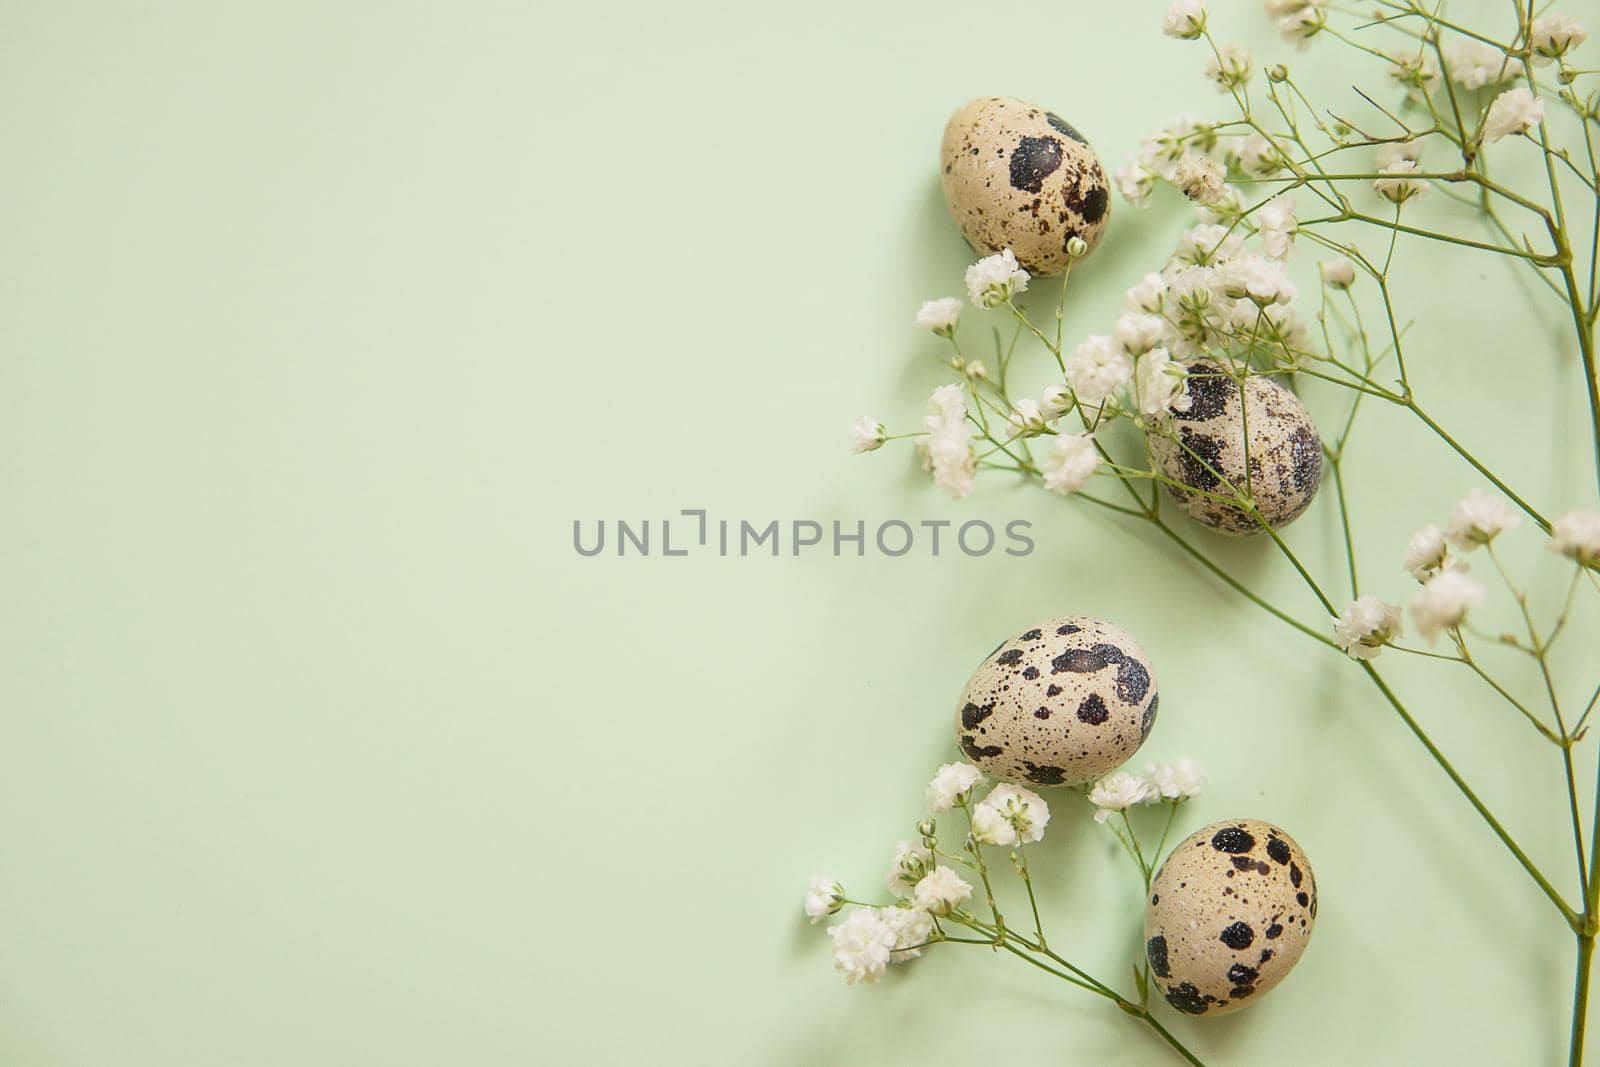 Easter background, quail eggs on a mint background, decorated with natural botanical elements, flat lay, view from above, empty space for text